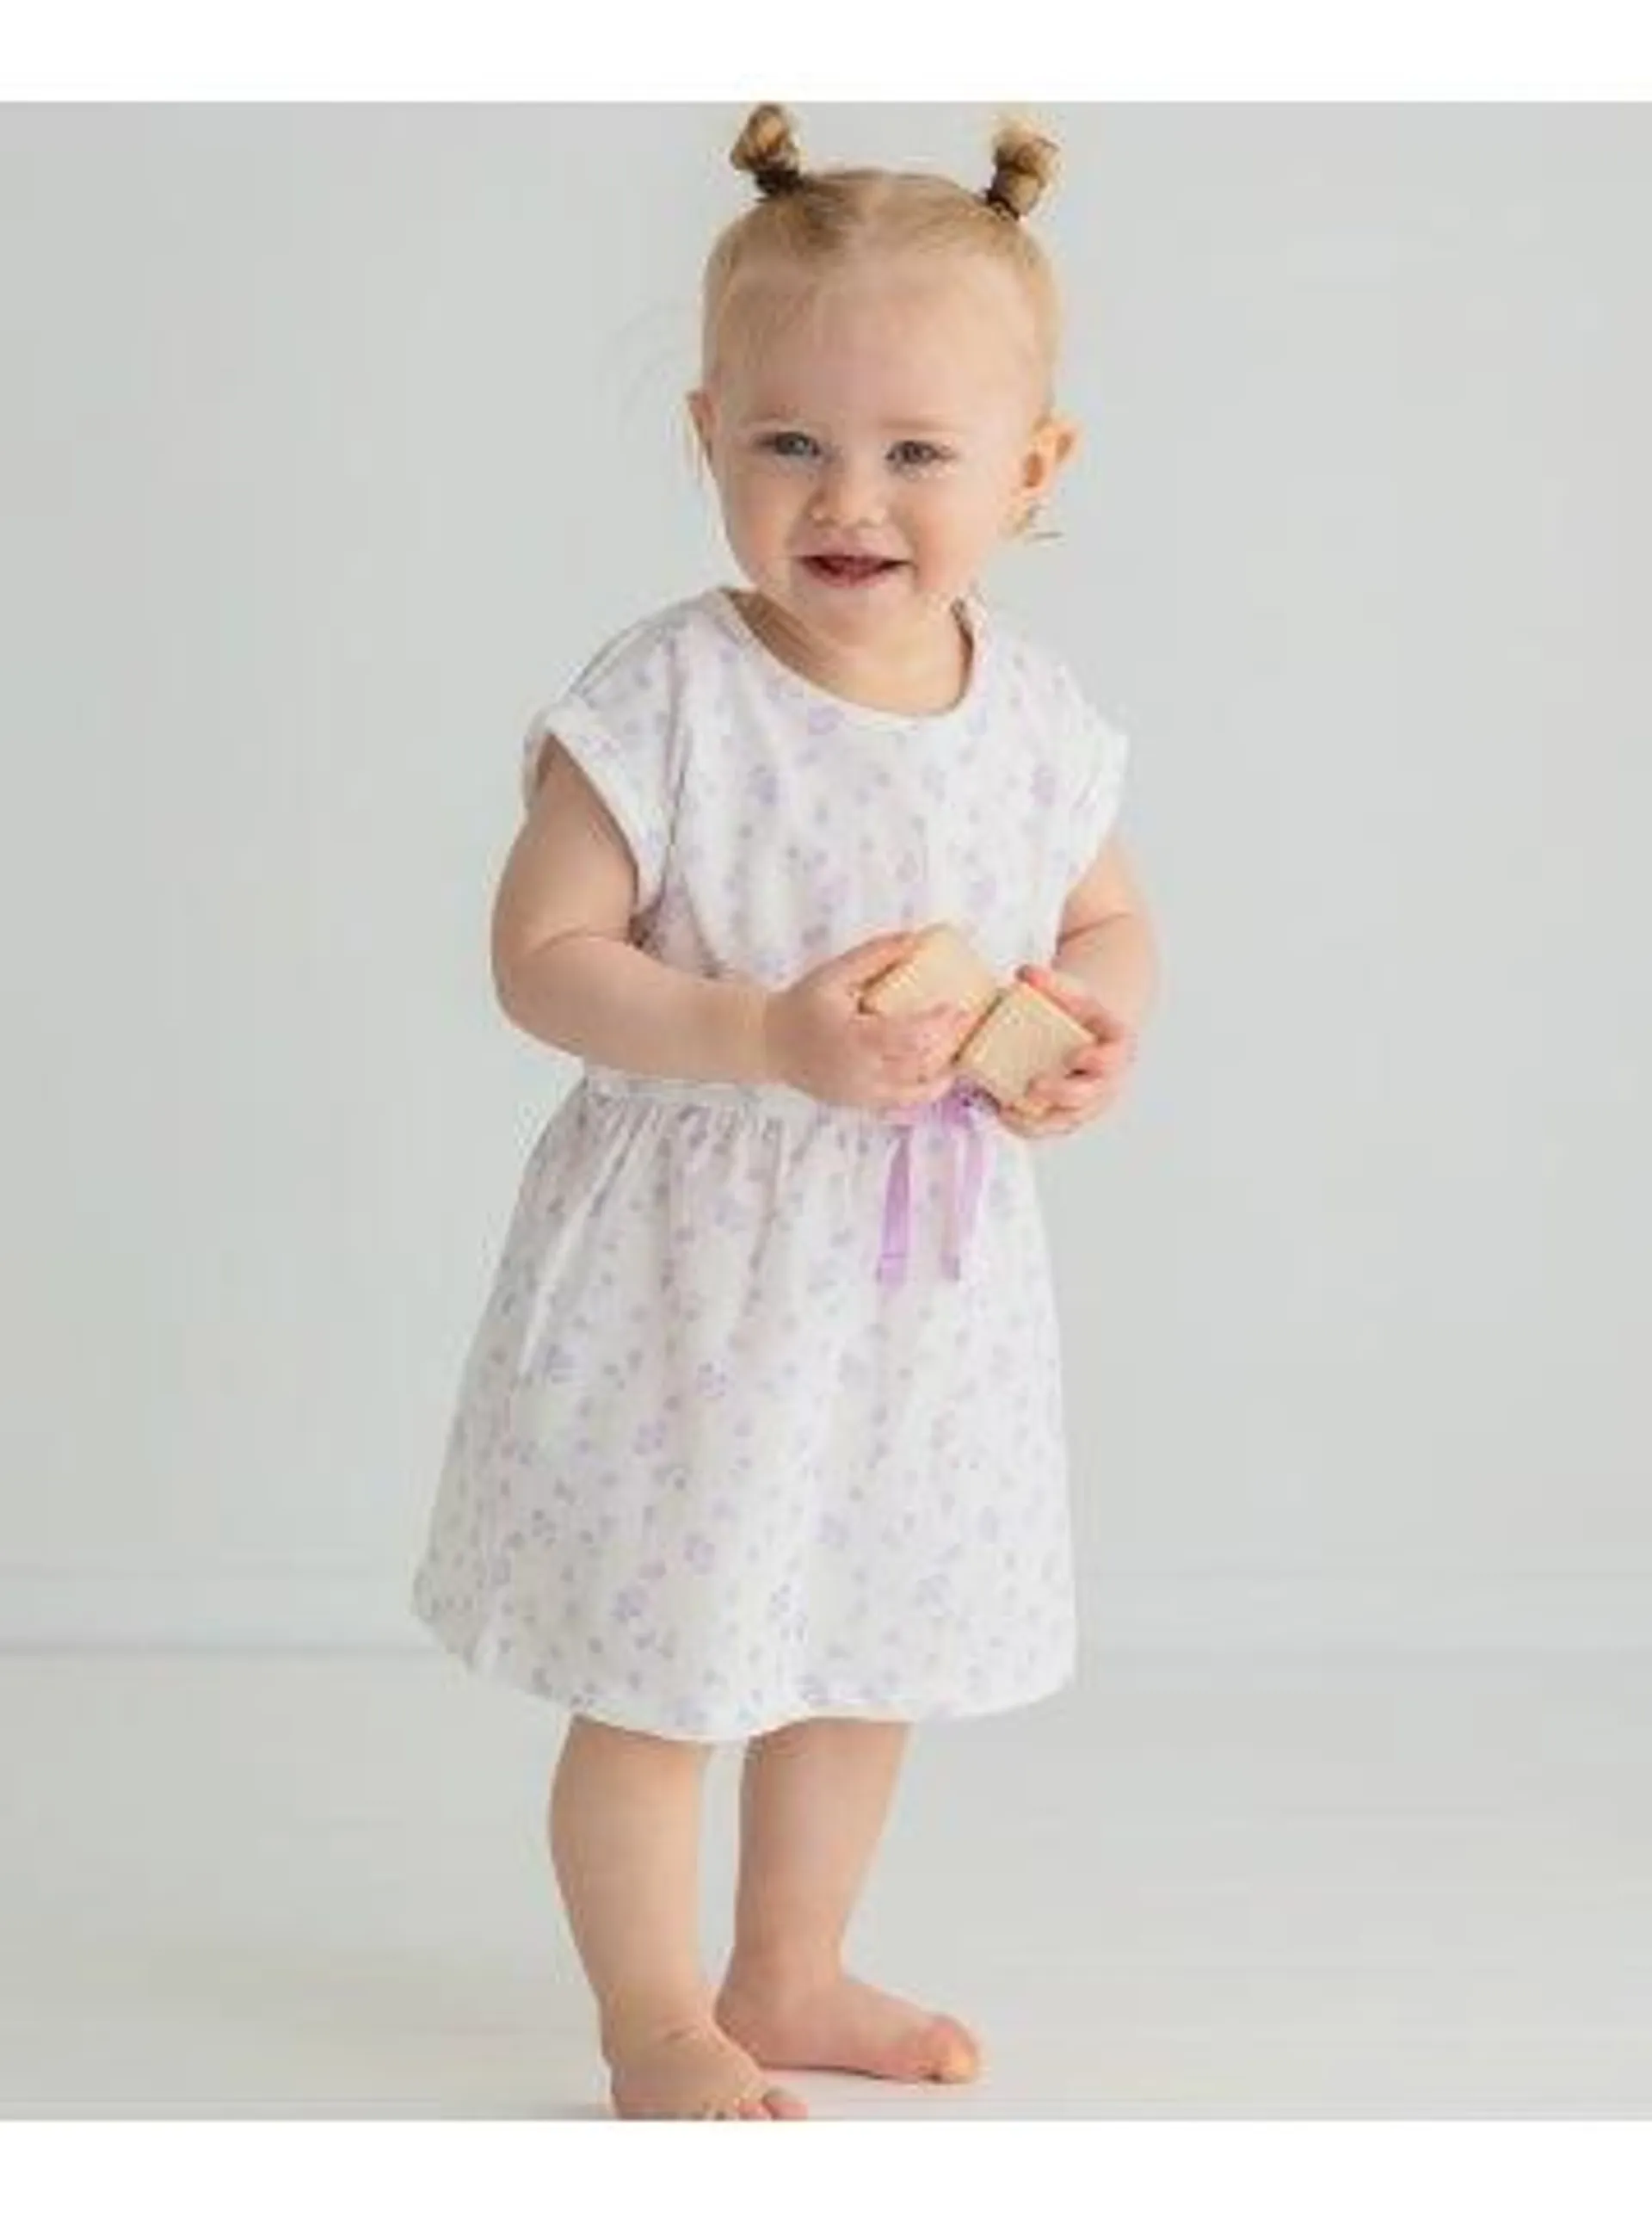 Babies' Knit Dress in White Floral